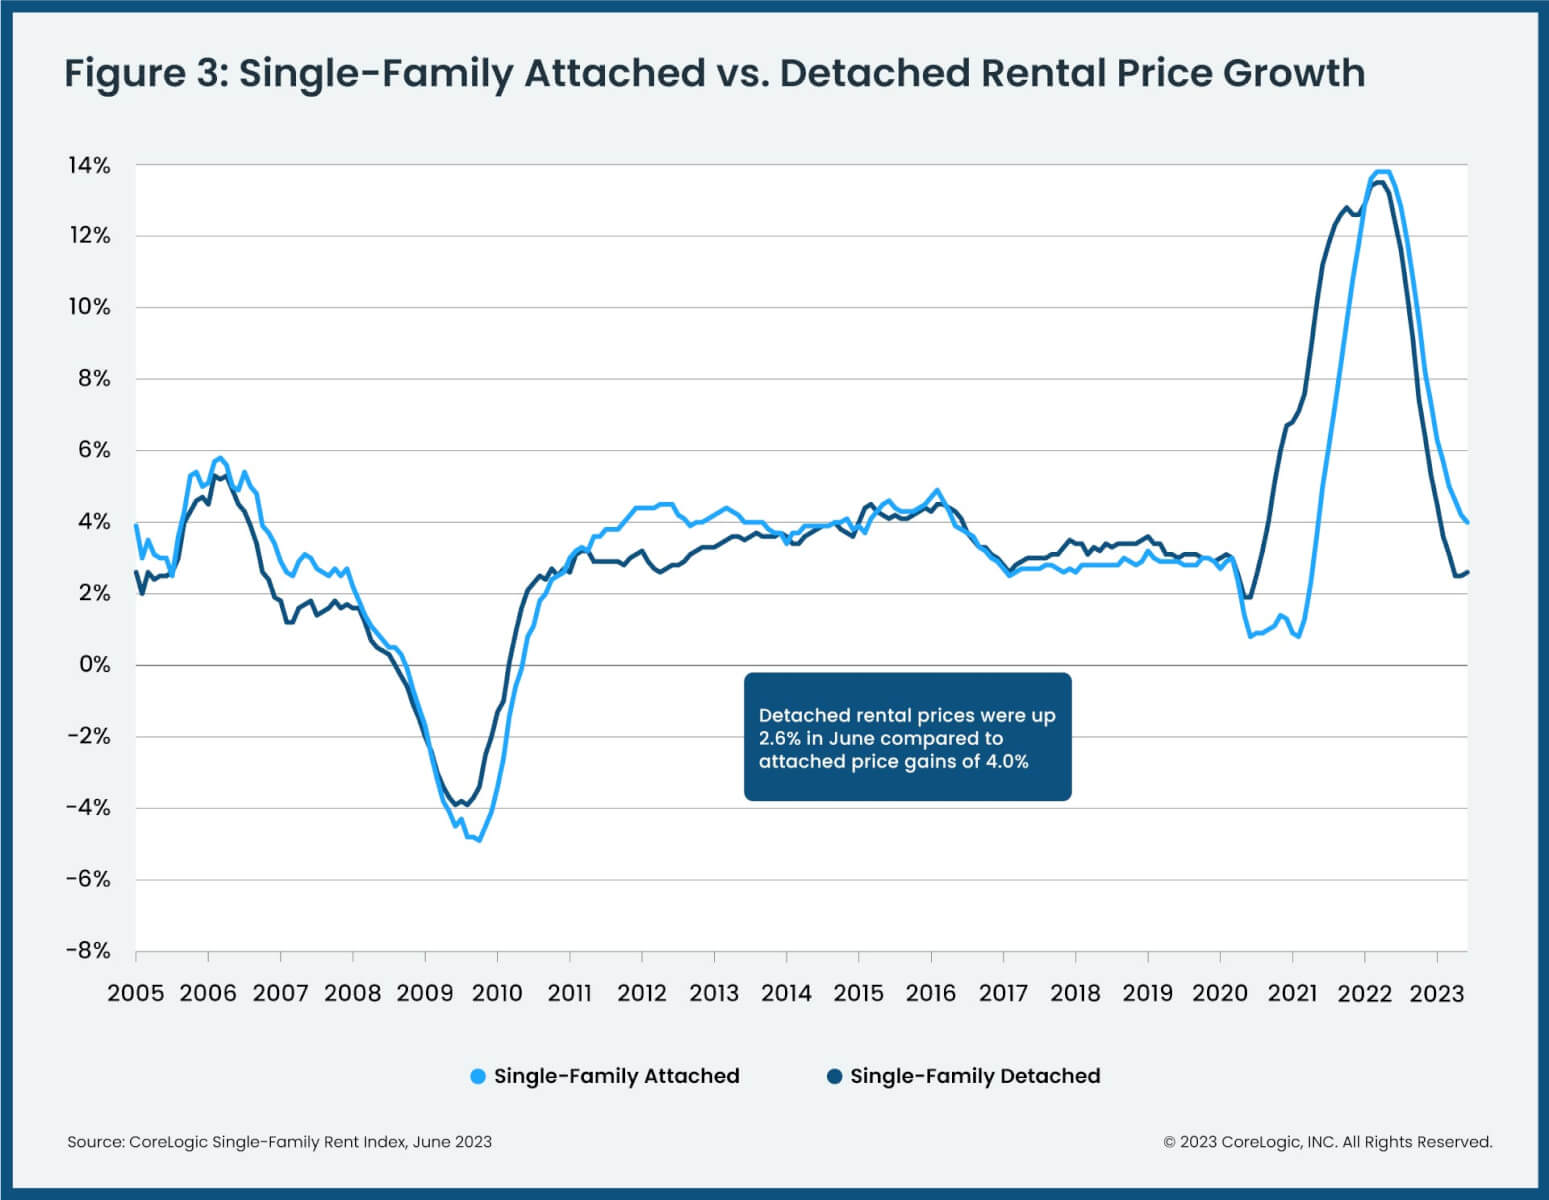 Single-family rental growth: attached versus detached properties